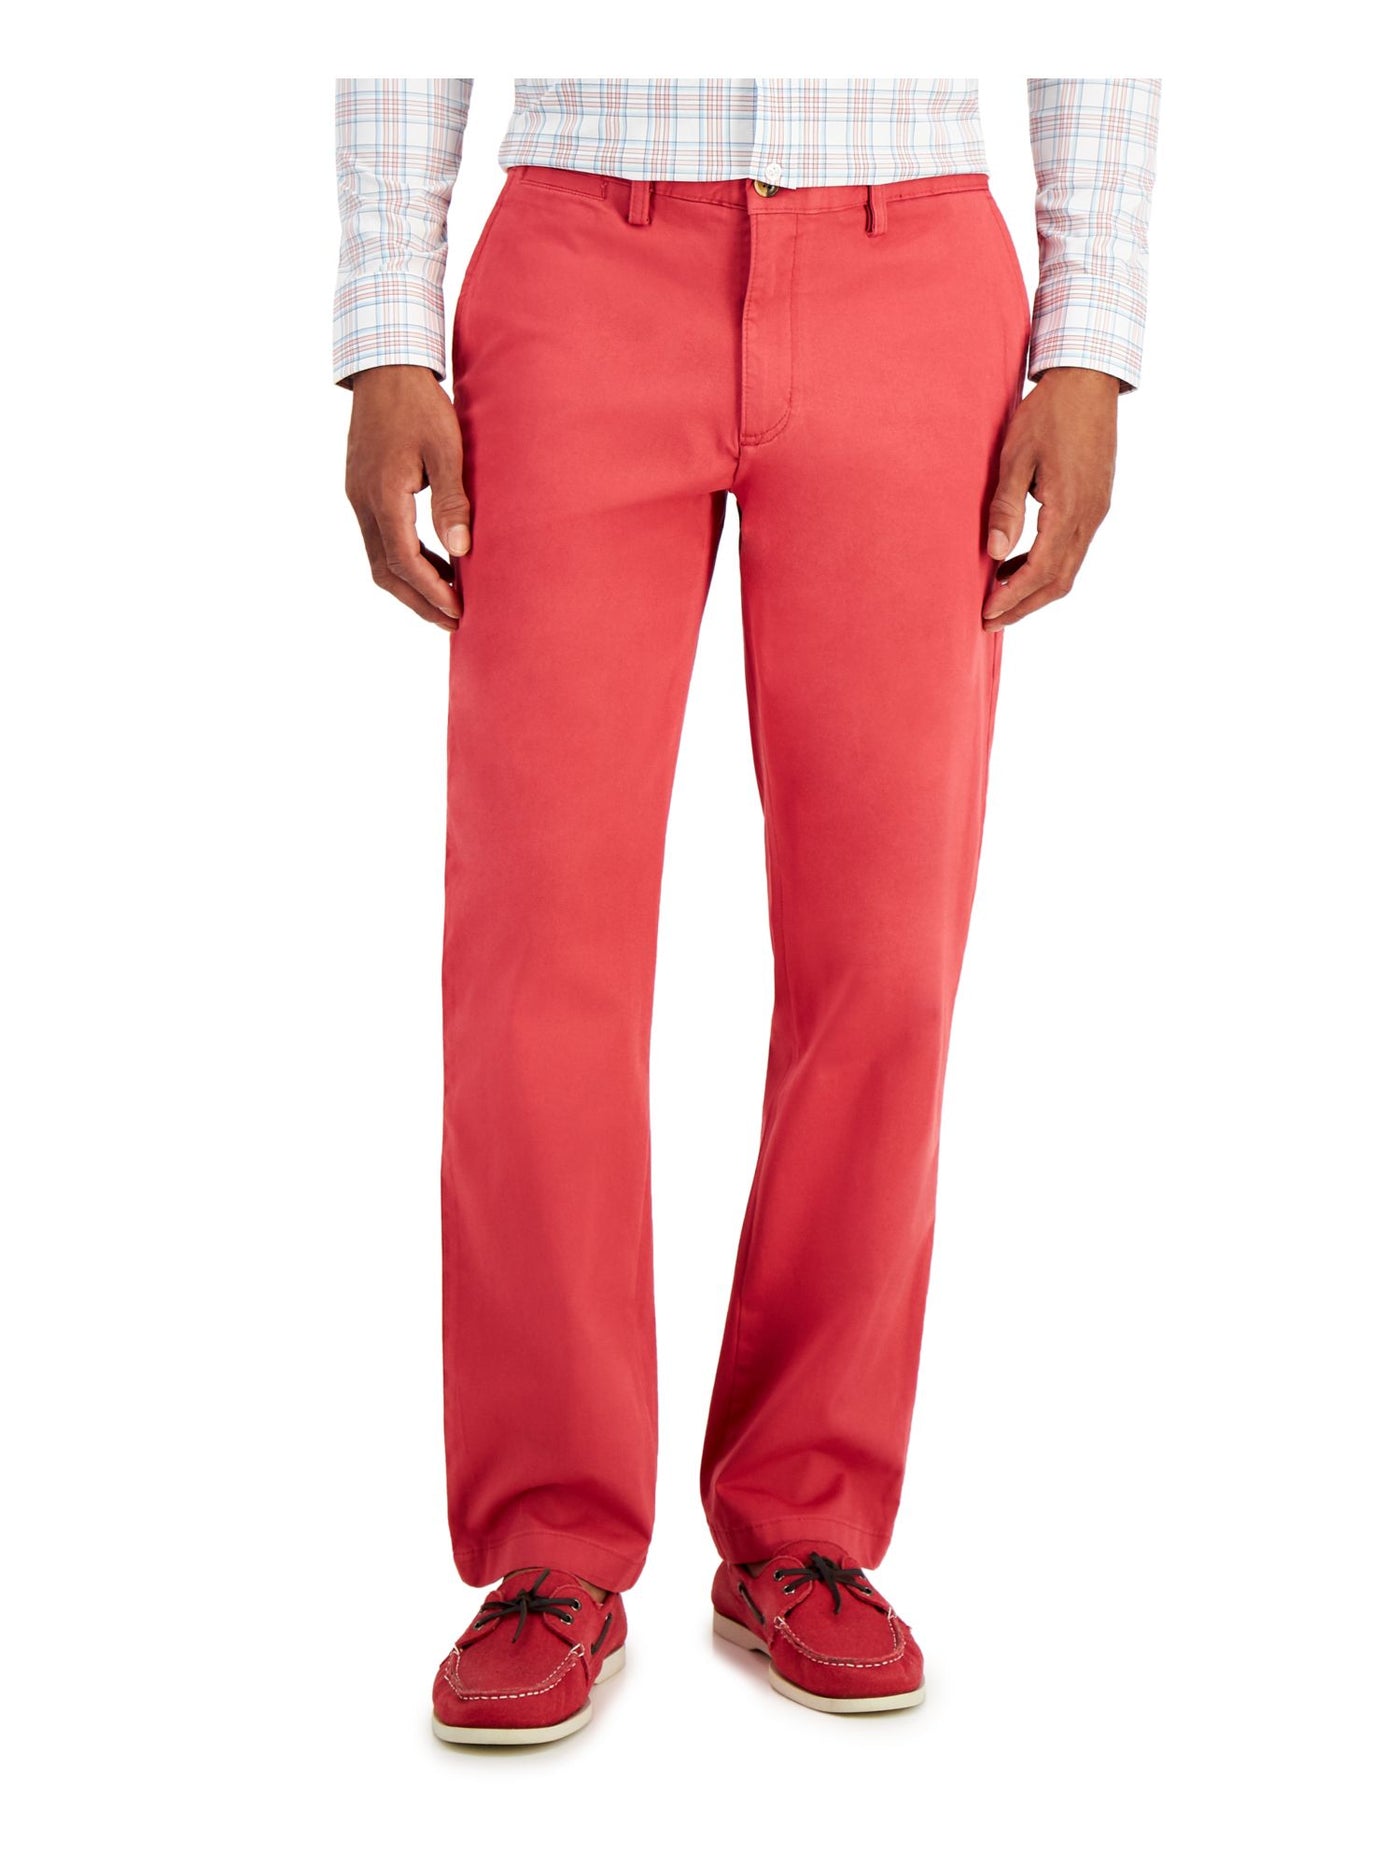 CLUBROOM Mens Red Classic Fit Stretch Chino Pants 38W/ 32L